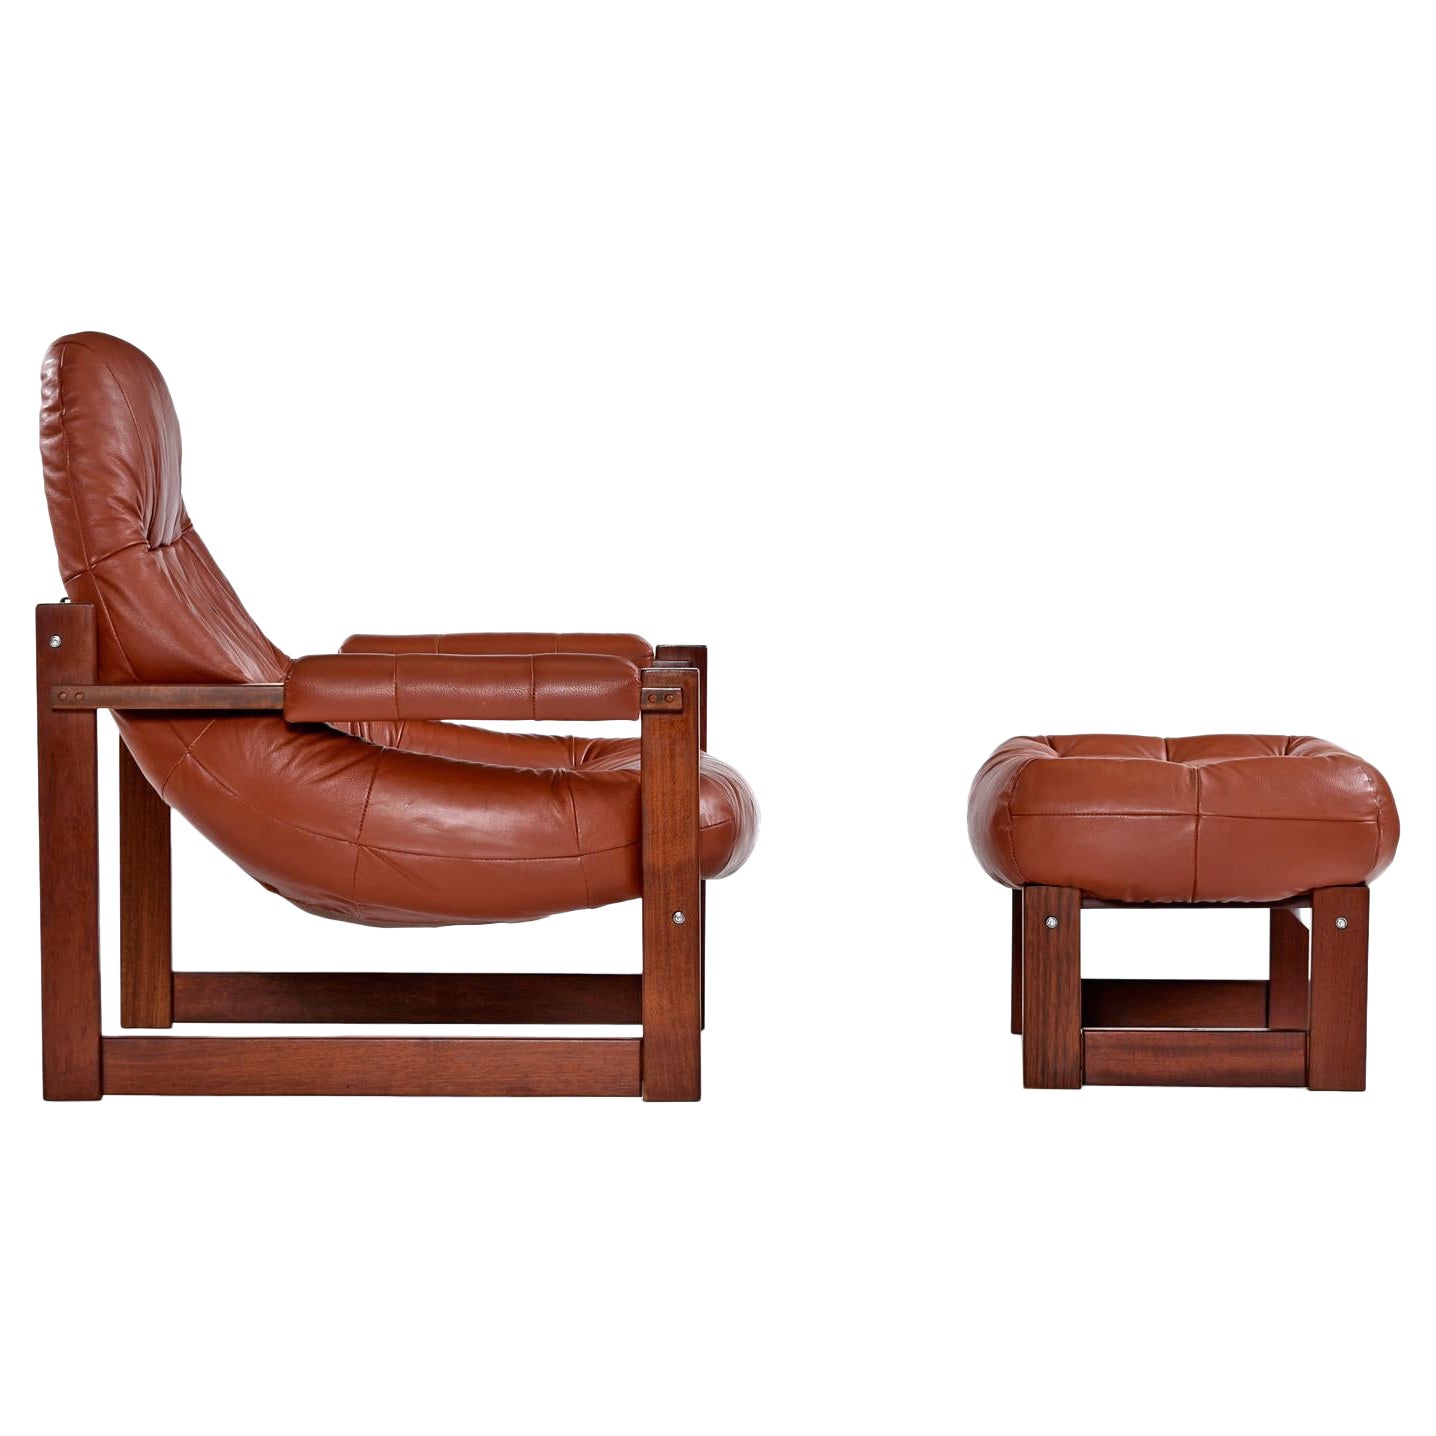 Rosewood & Cognac Leather Mp-163 "Earth Chair" & Ottoman by Percival Lafer